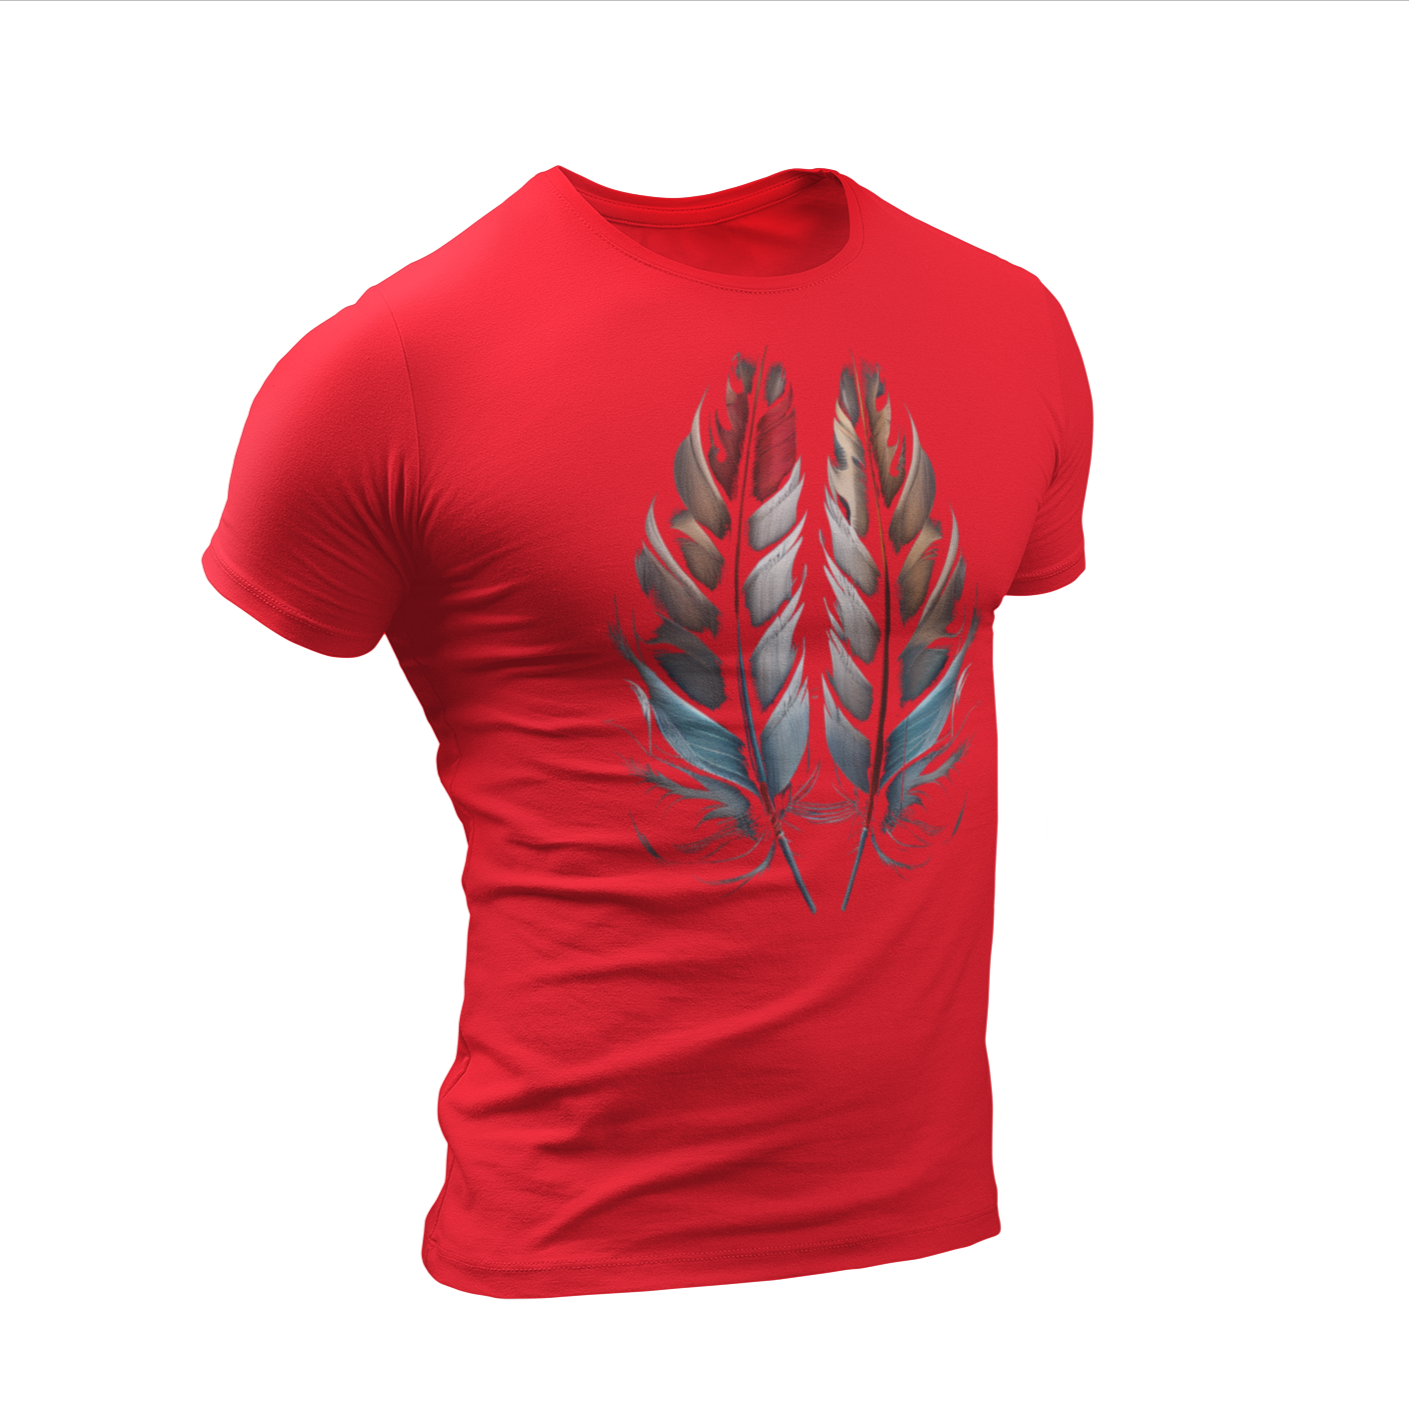 Red Tribal Feathers shirt by Made Inc 